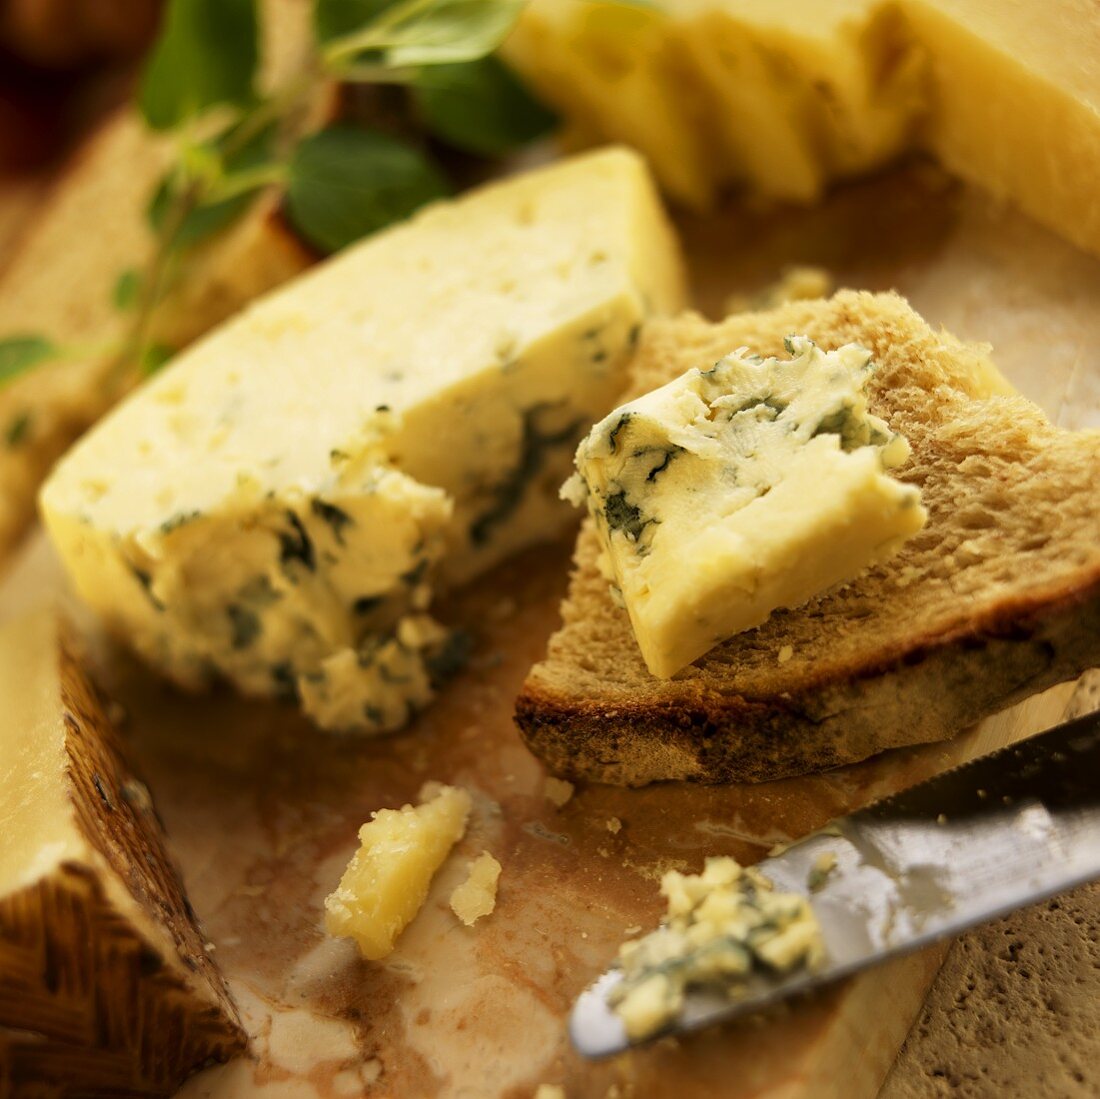 Blue Cheese on Wheat Bread; Knife